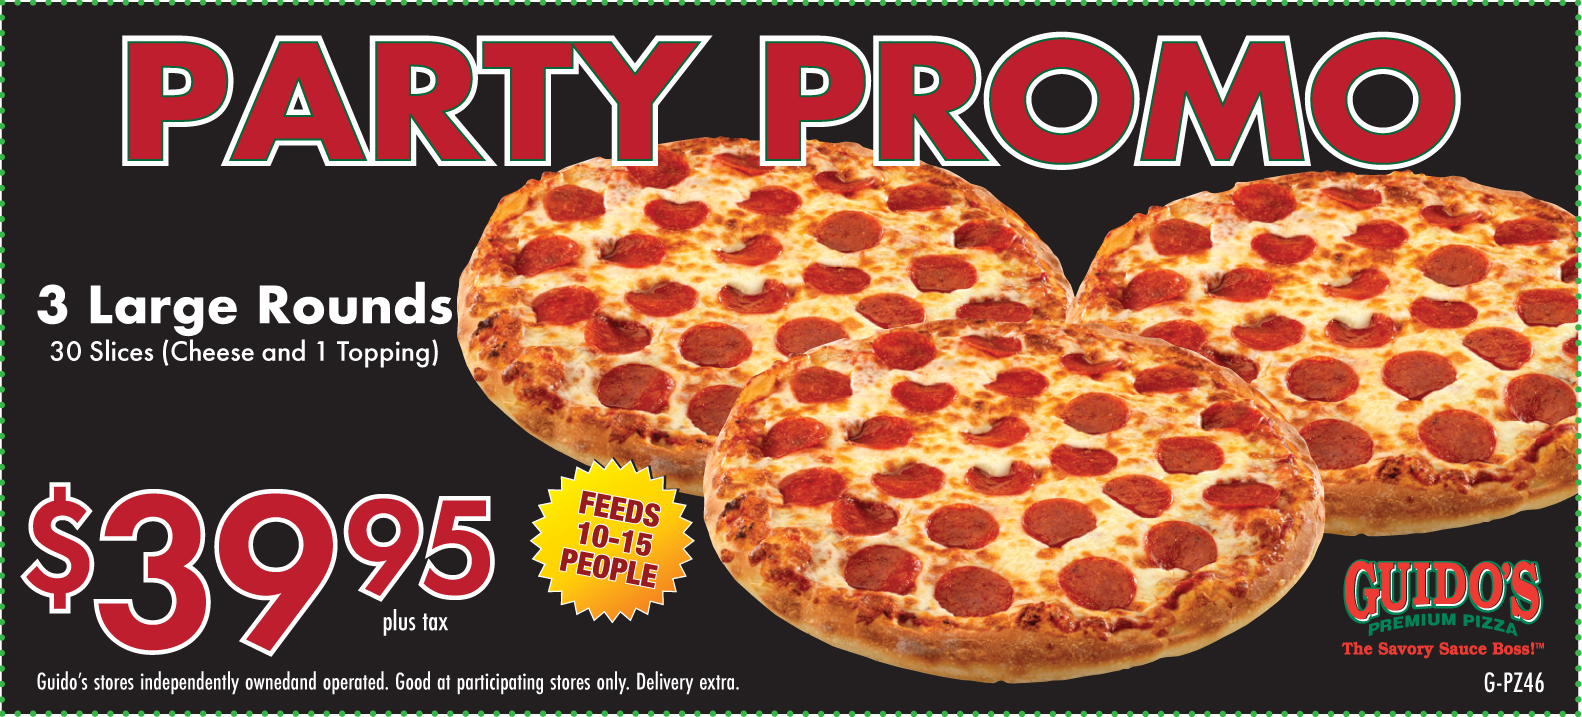 Party Promo 3 Large Rounds 1 Topping $39.95